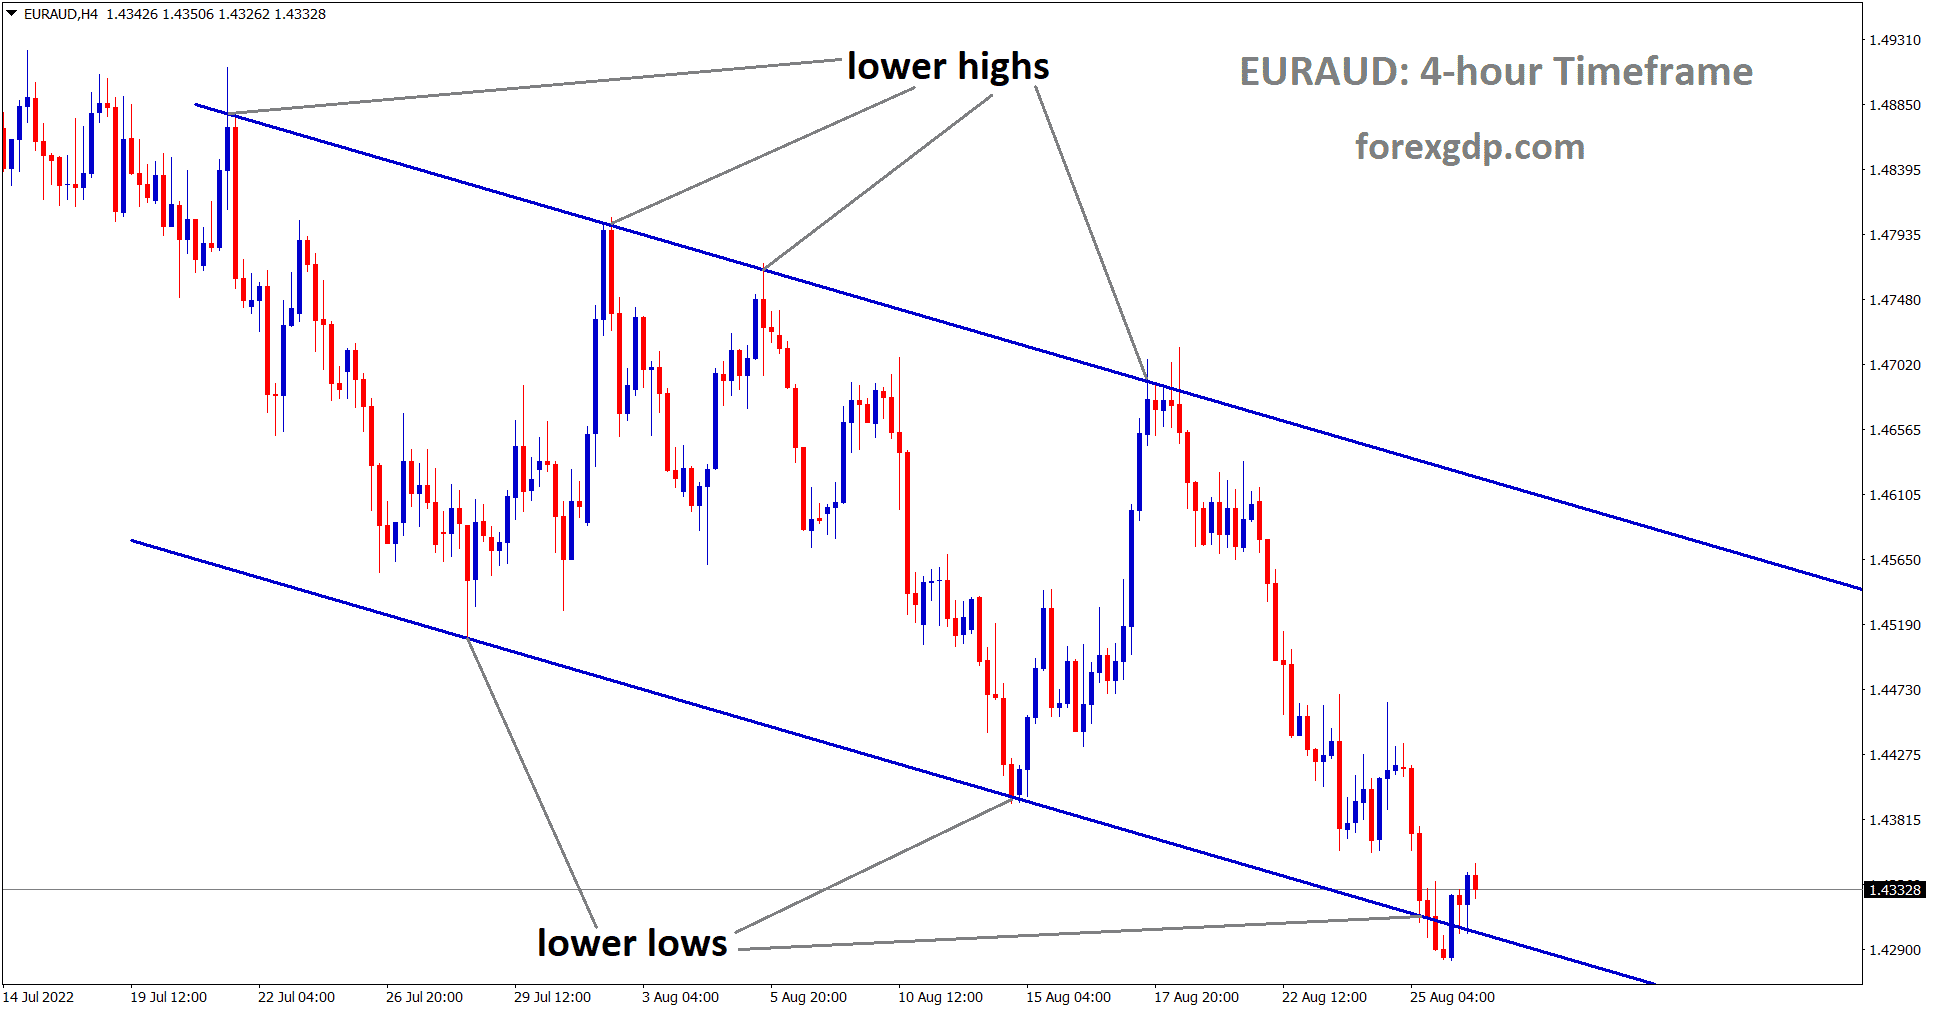 EURAUD is moving in the Descending channel and the Market has reached the lower low area of the channel.